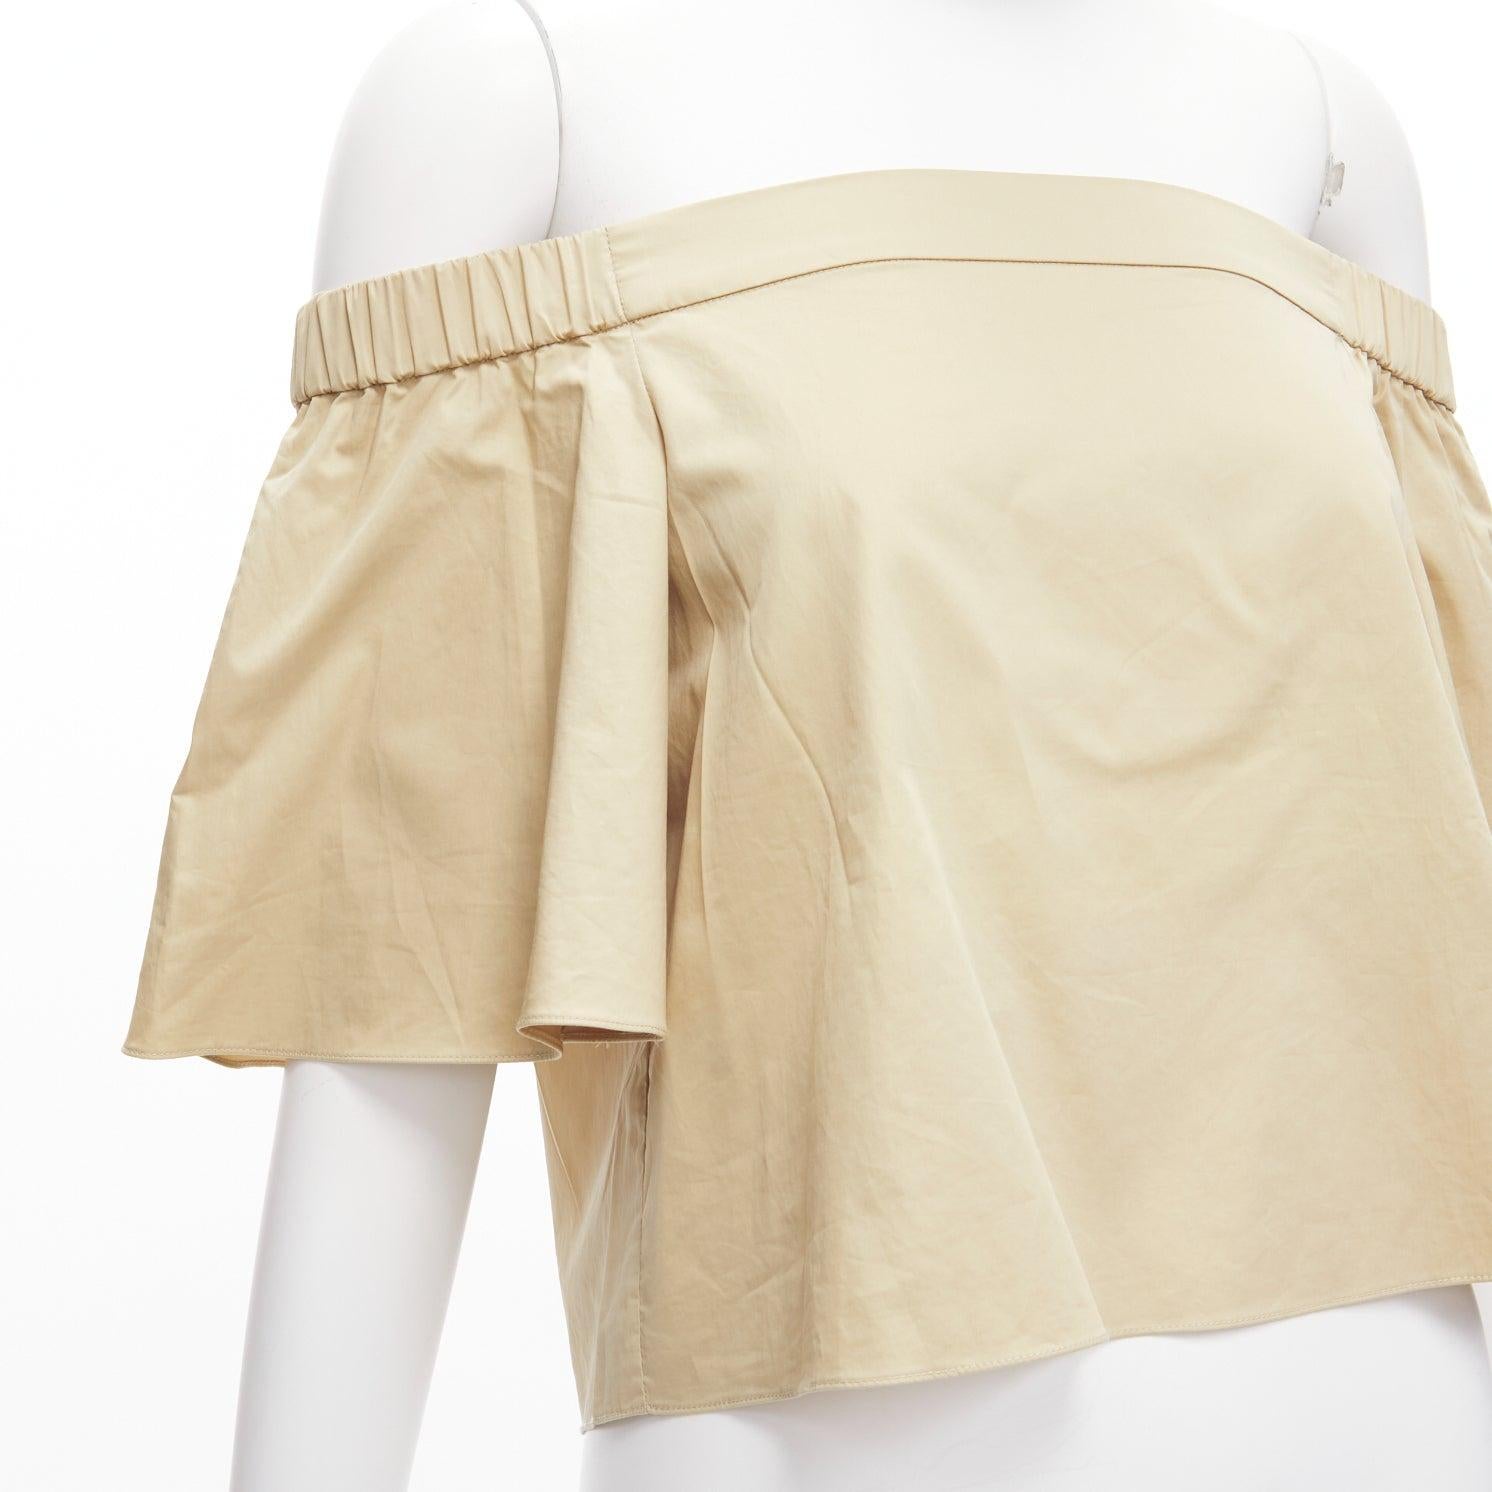 TIBI 100% cotton khaki off shoulder bell sleeves flared cropped top US0 XS
Reference: SNKO/A00389
Brand: Tibi
Material: Cotton
Color: Khaki
Pattern: Solid
Closure: Pullover
Made in: China

CONDITION:
Condition: Excellent, this item was pre-owned and